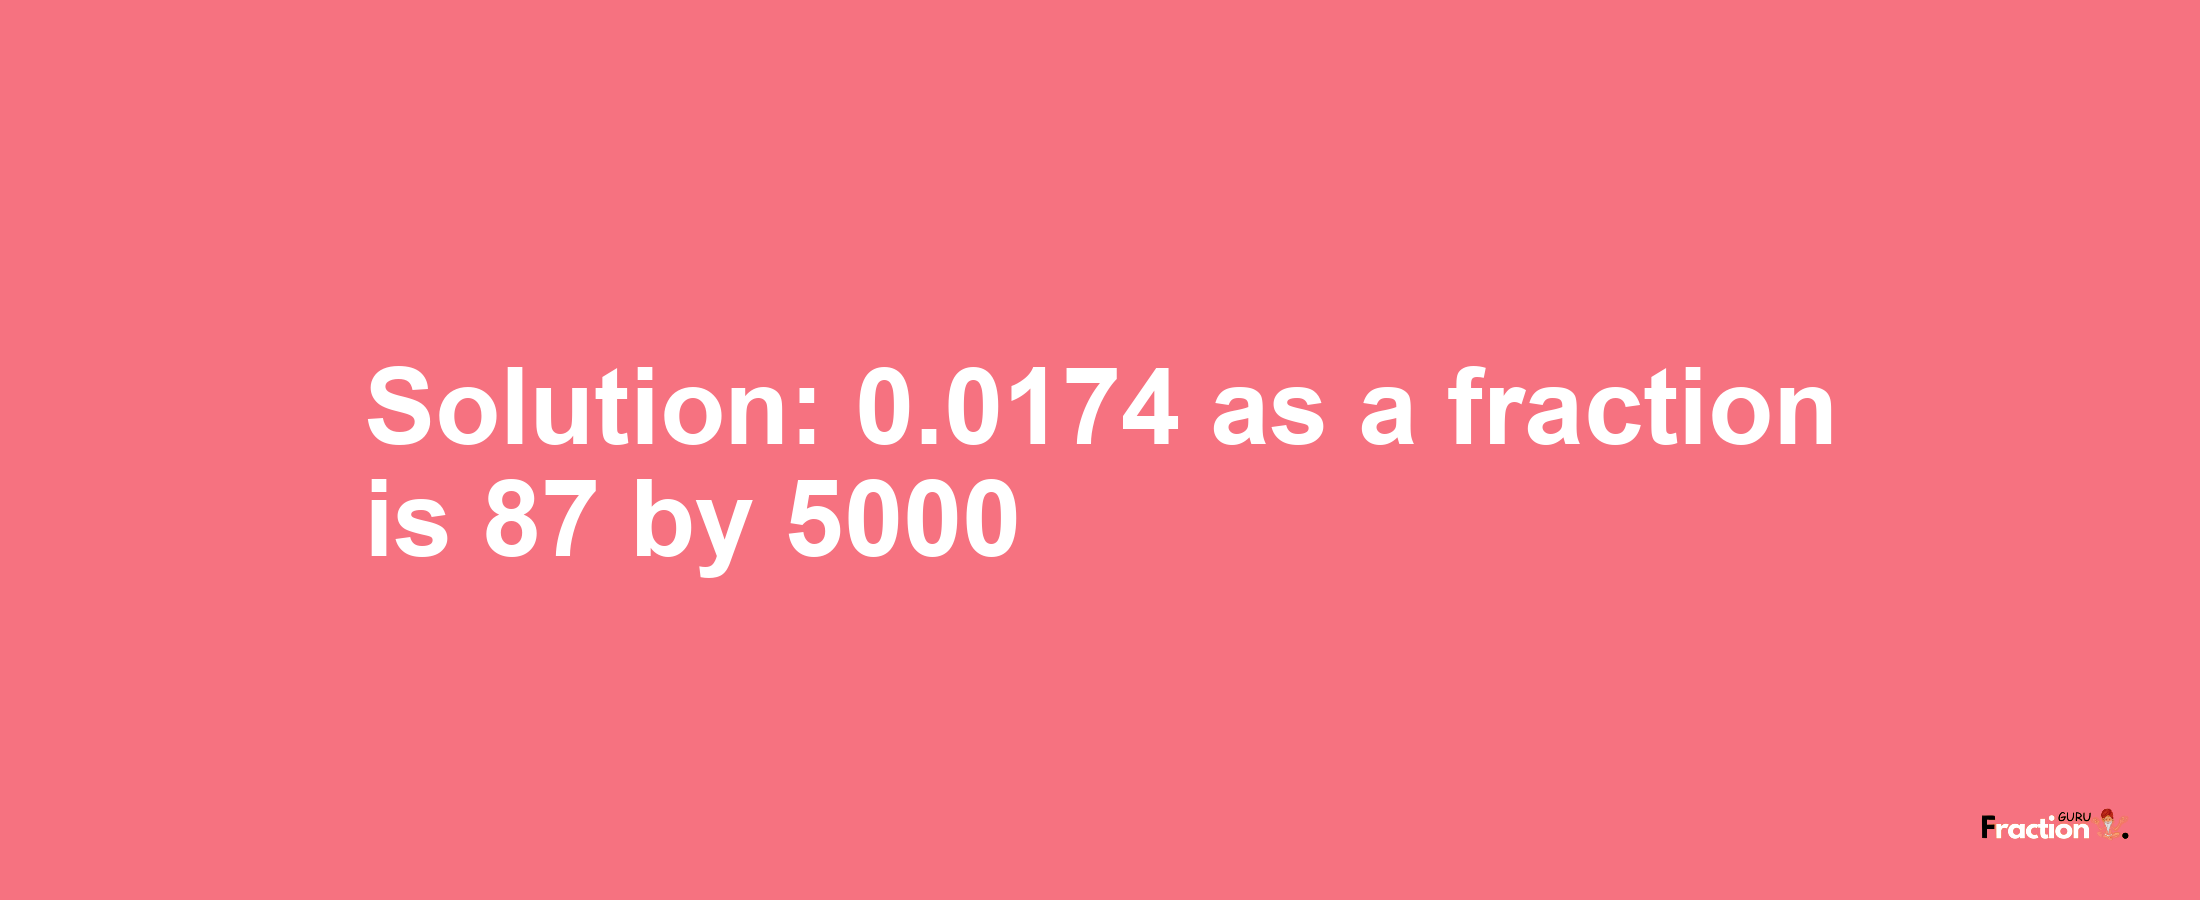 Solution:0.0174 as a fraction is 87/5000